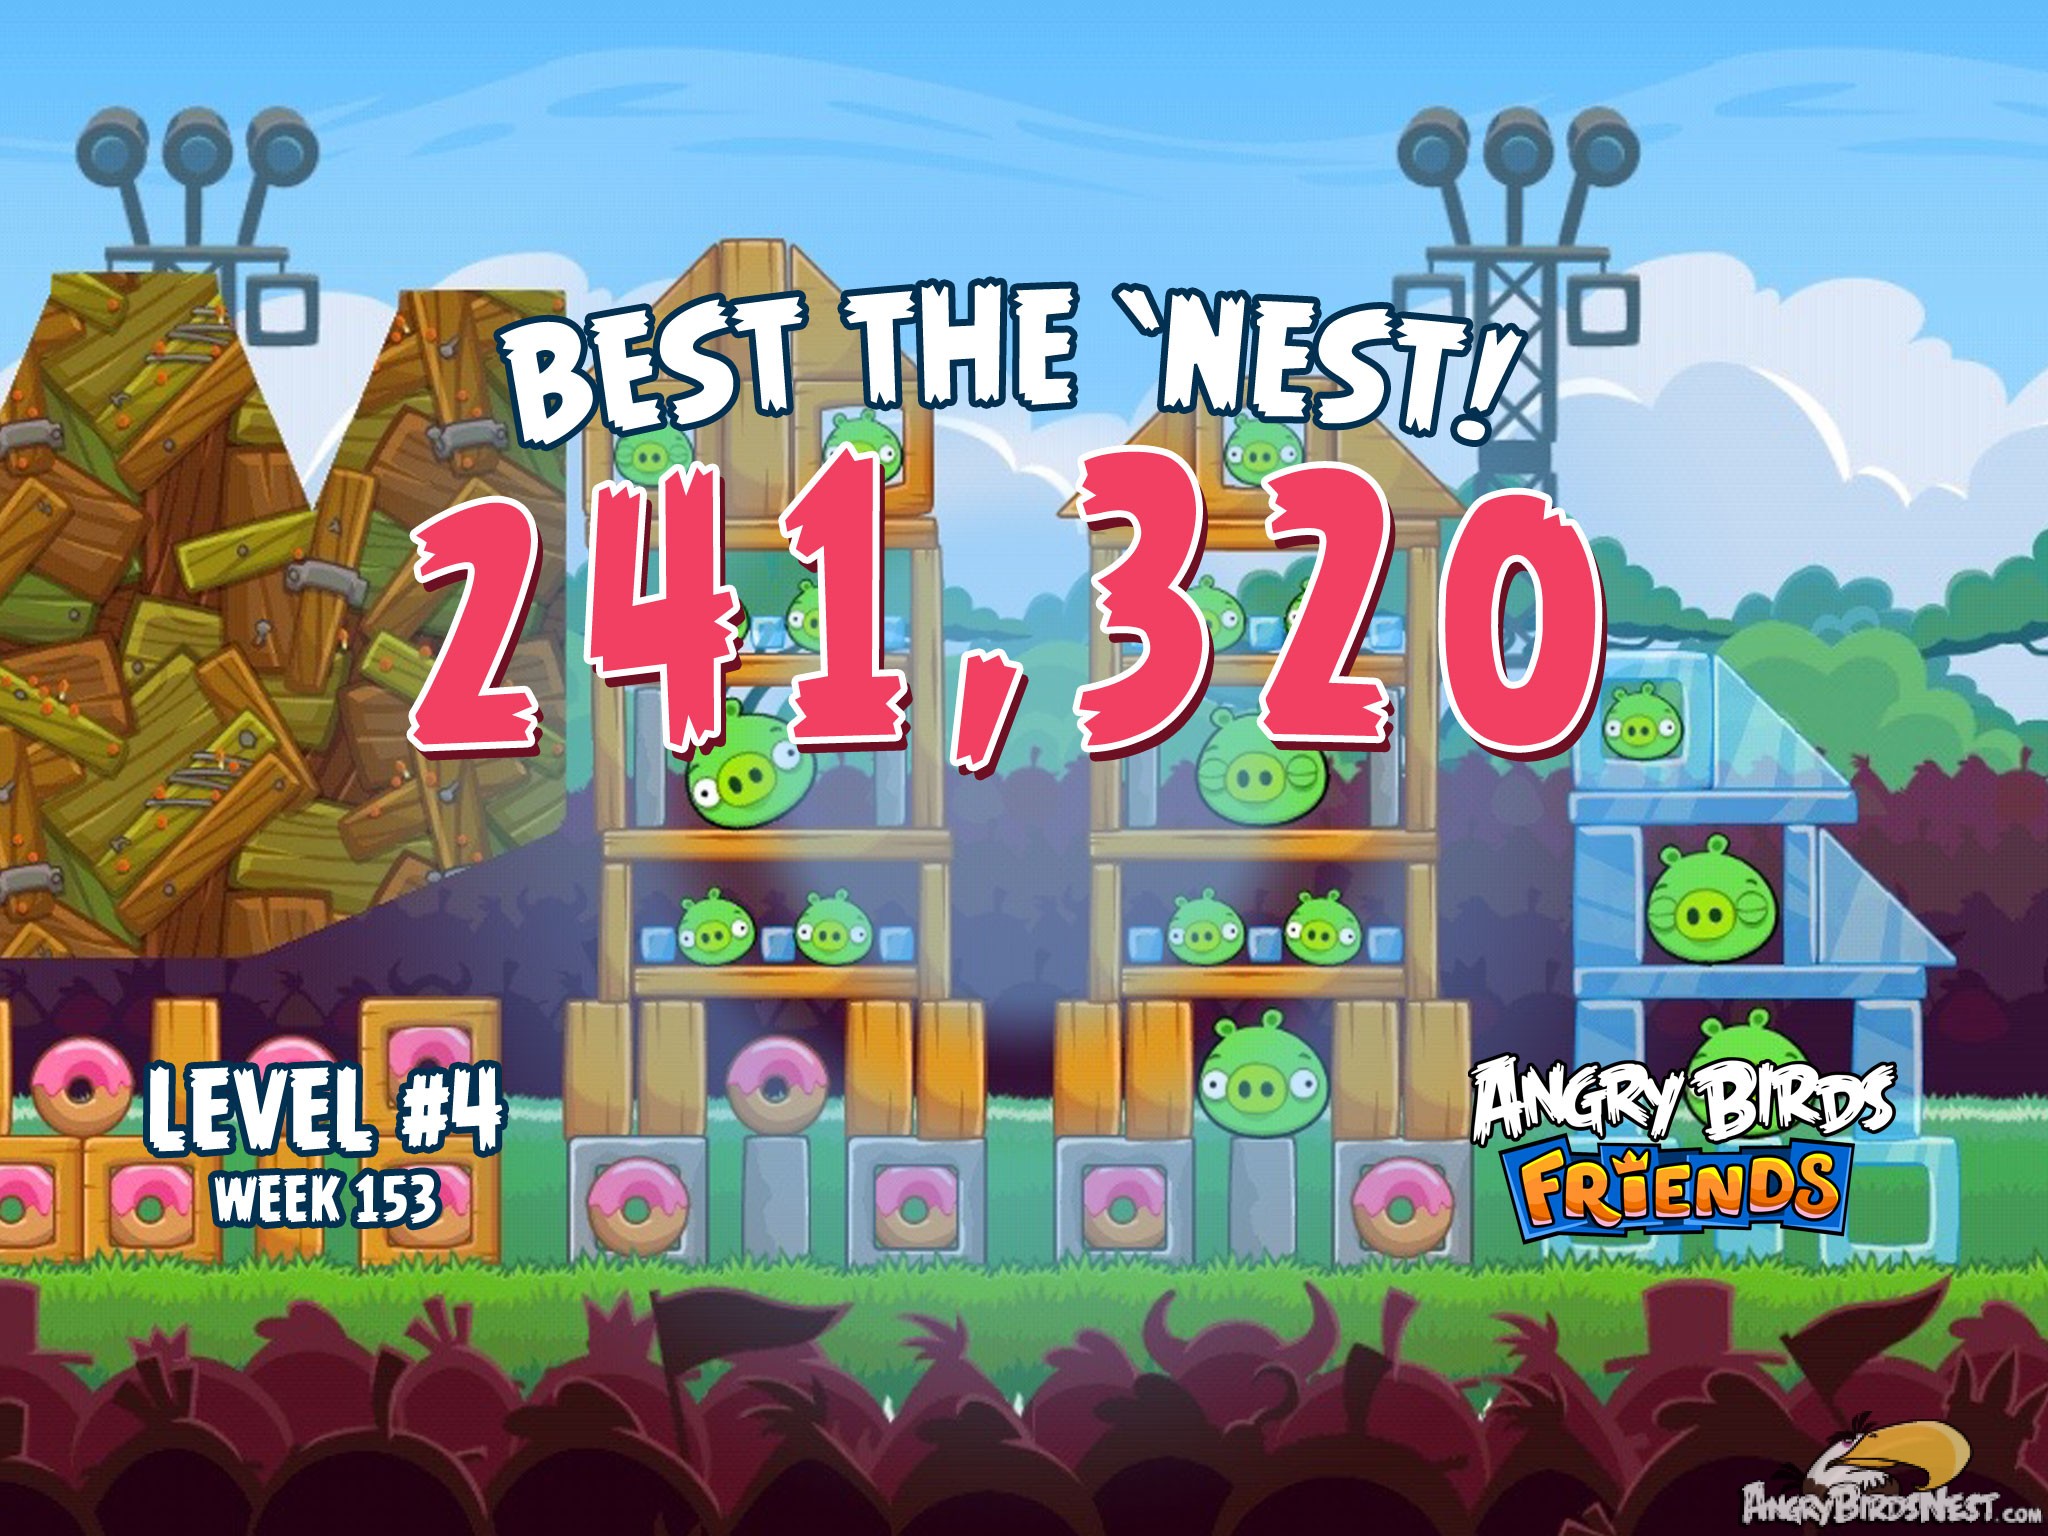 Angry Birds Friends Best the Nest Week 153 Level 4